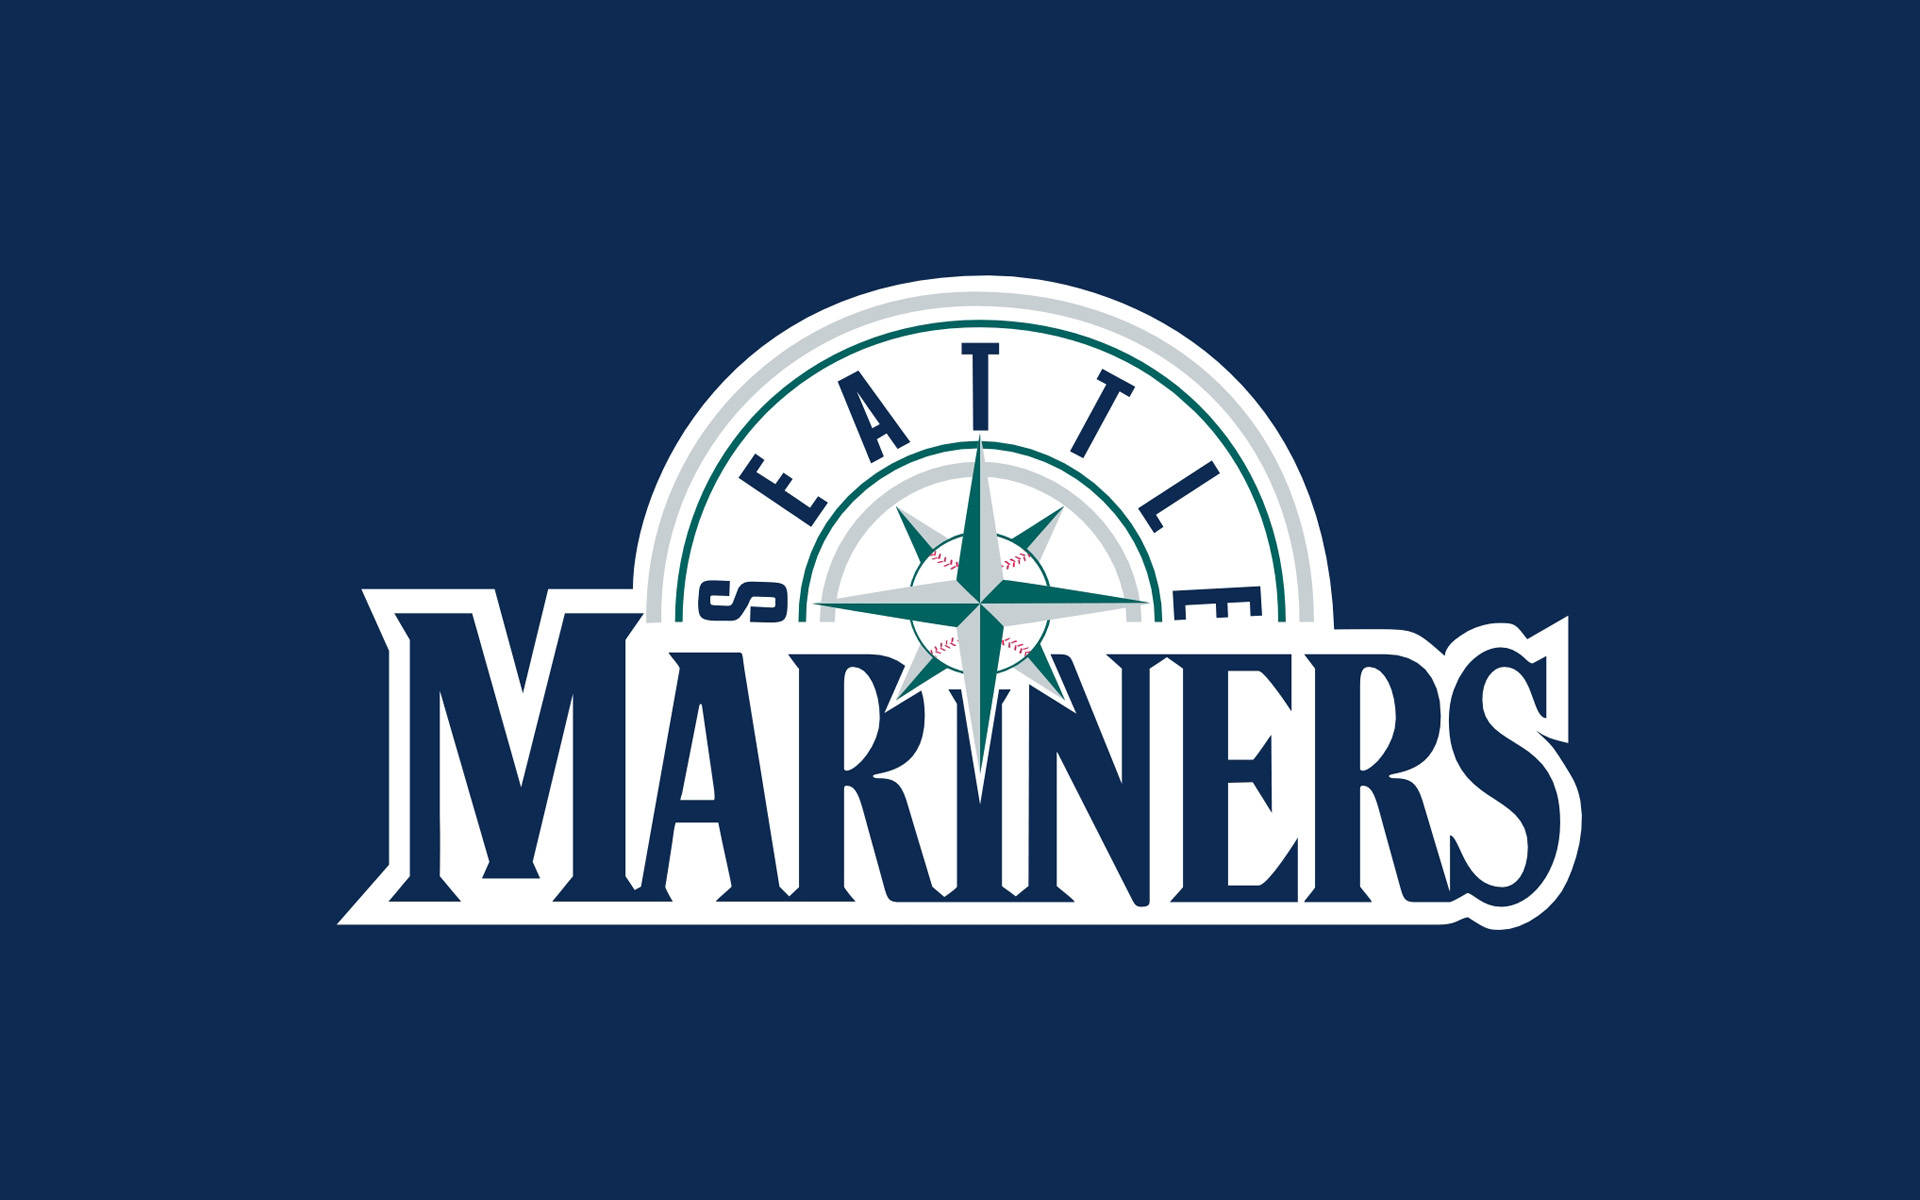 Seattle Mariners Large Text Background